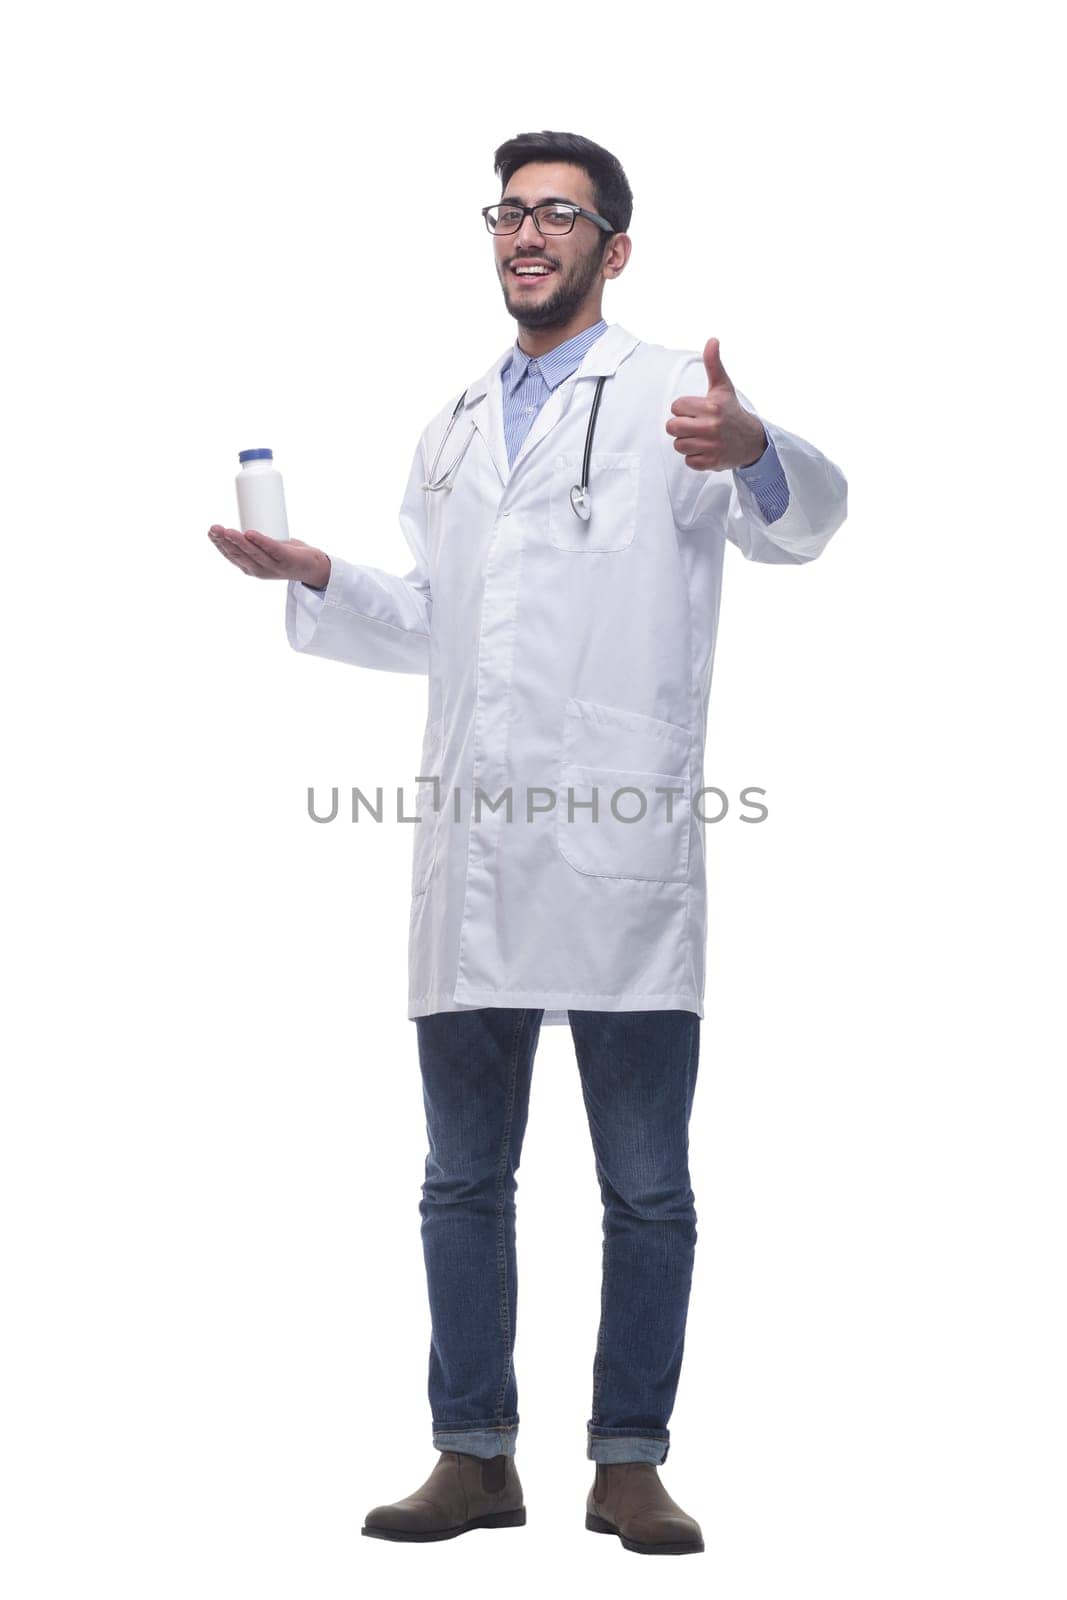 in full growth. smiling doctor pointing at hand sanitizer . isolated on a white background.